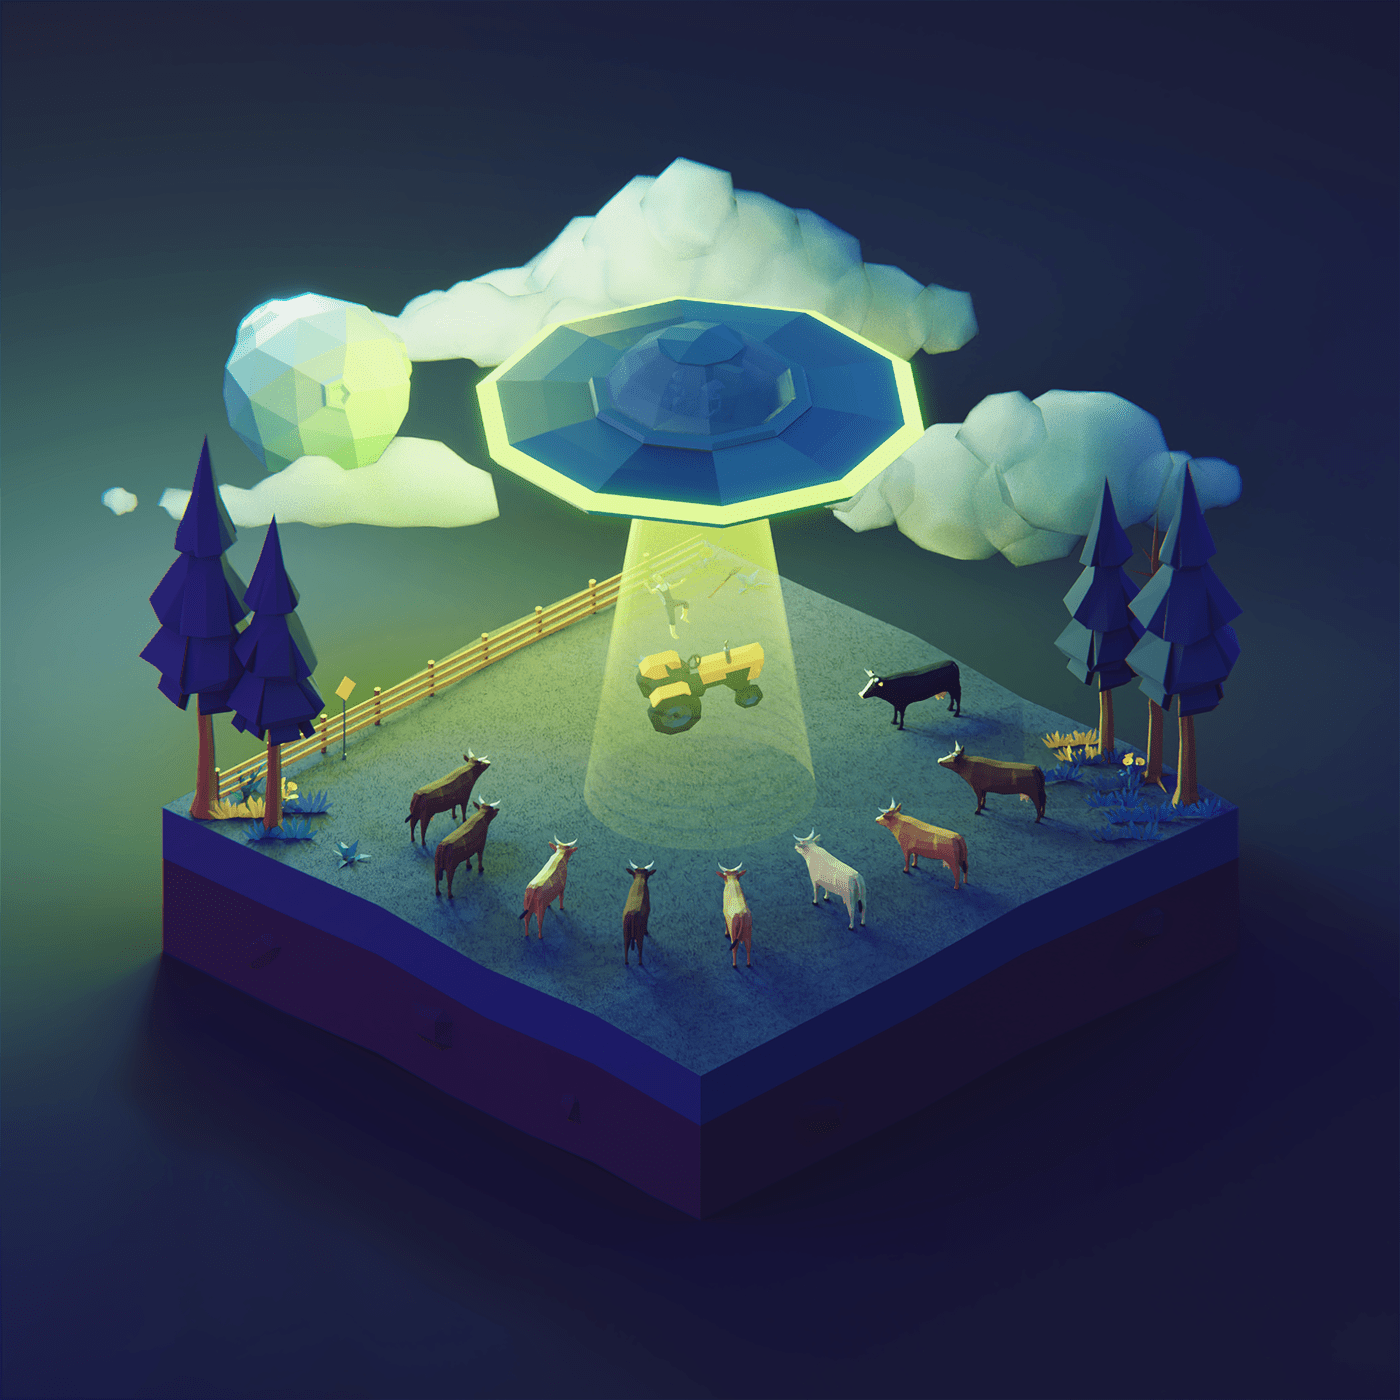 Low Poly Worlds 2. on Behance